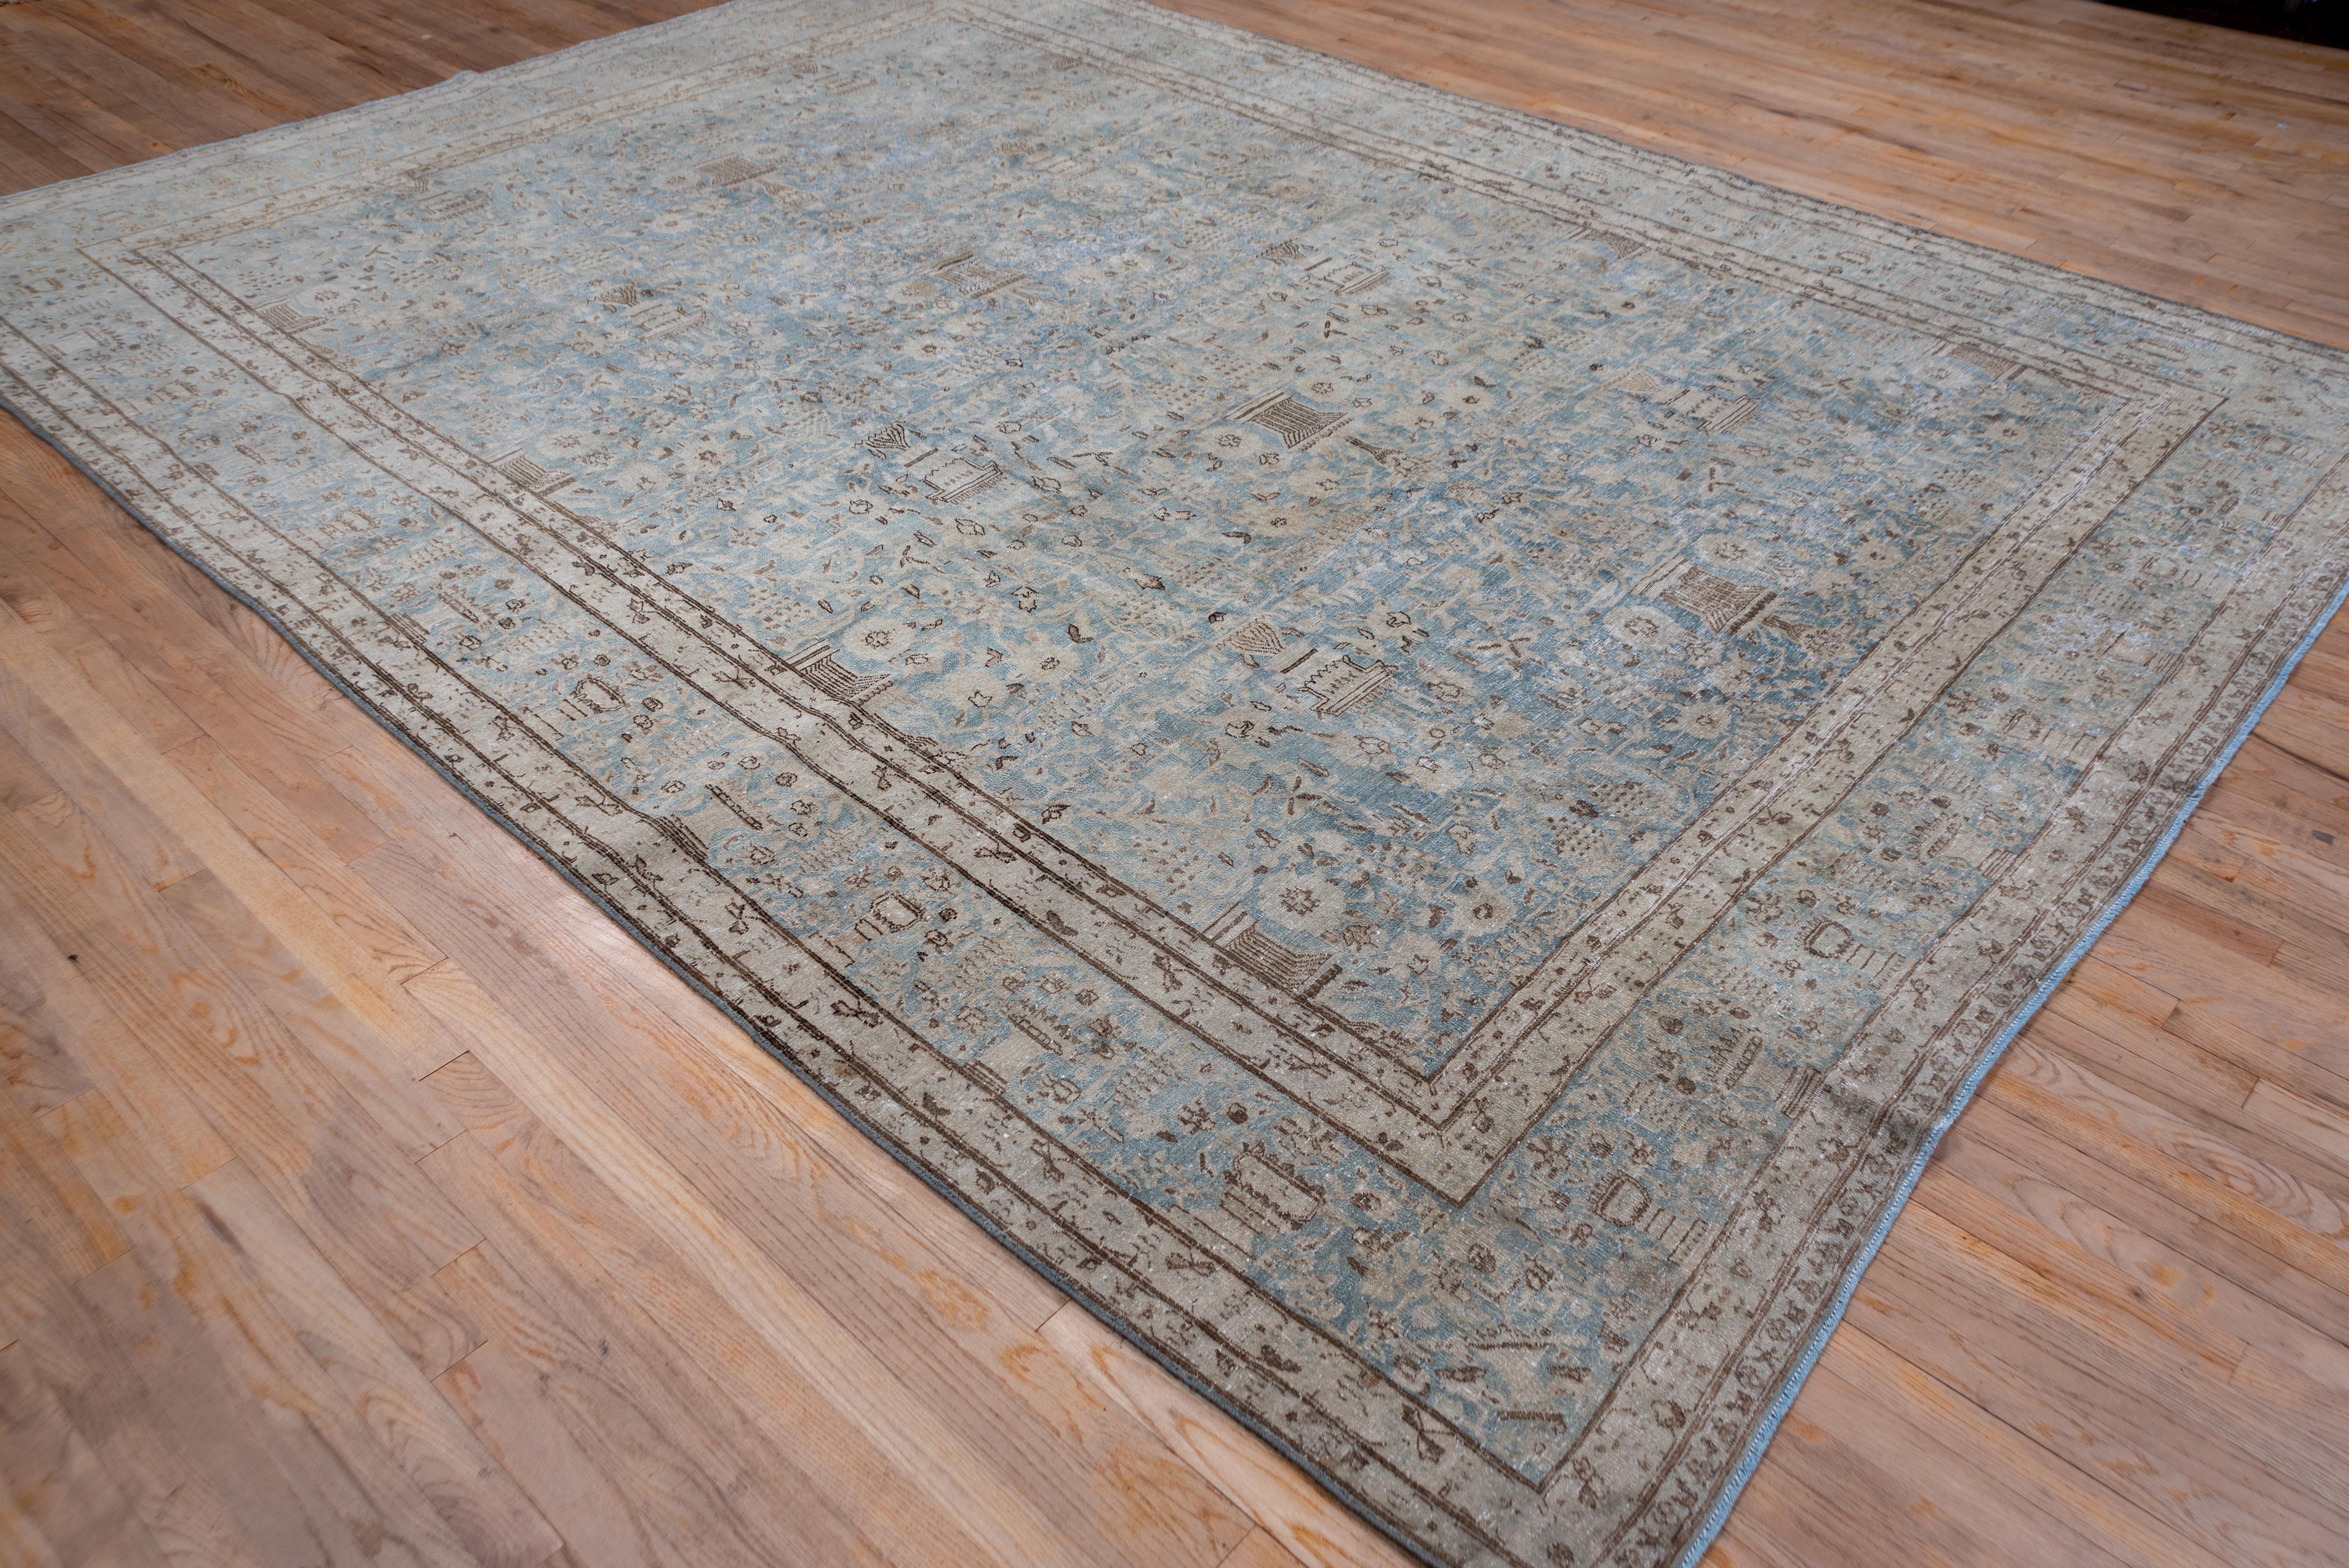 All vases, in the light blue field and in the lighter blue border, with flowers sprouting to fill every crevice. Dark chocolate details on this well-woven SE Persian city carpet.